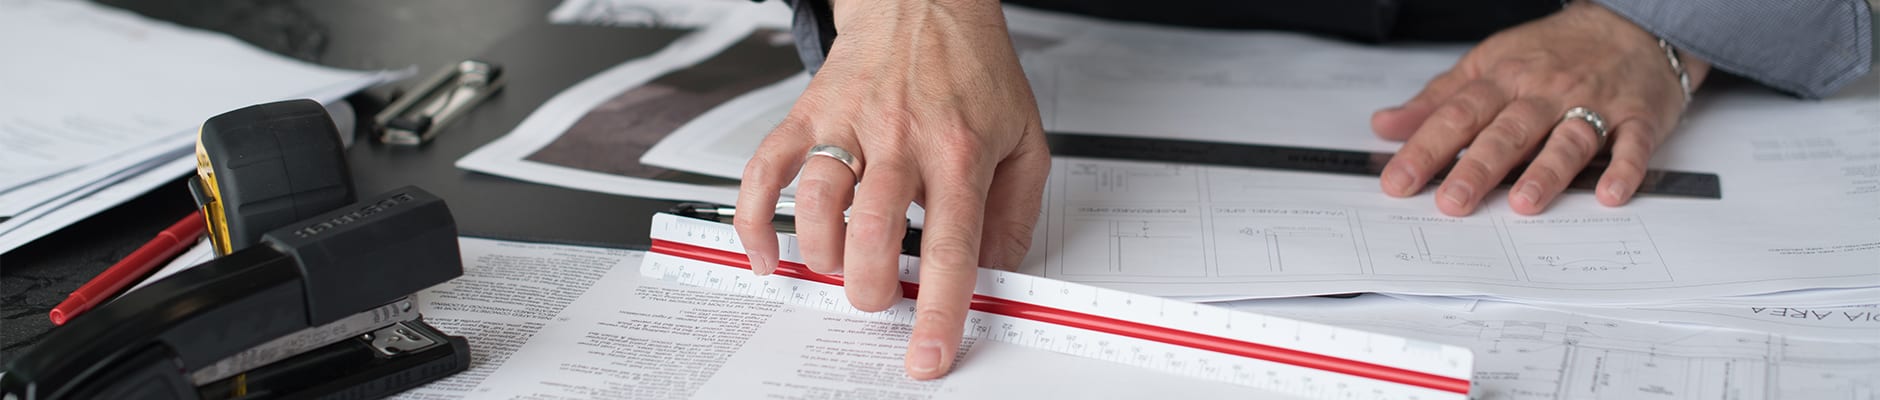 Close up of two hands holding ruler and pointing to blueprint of designs